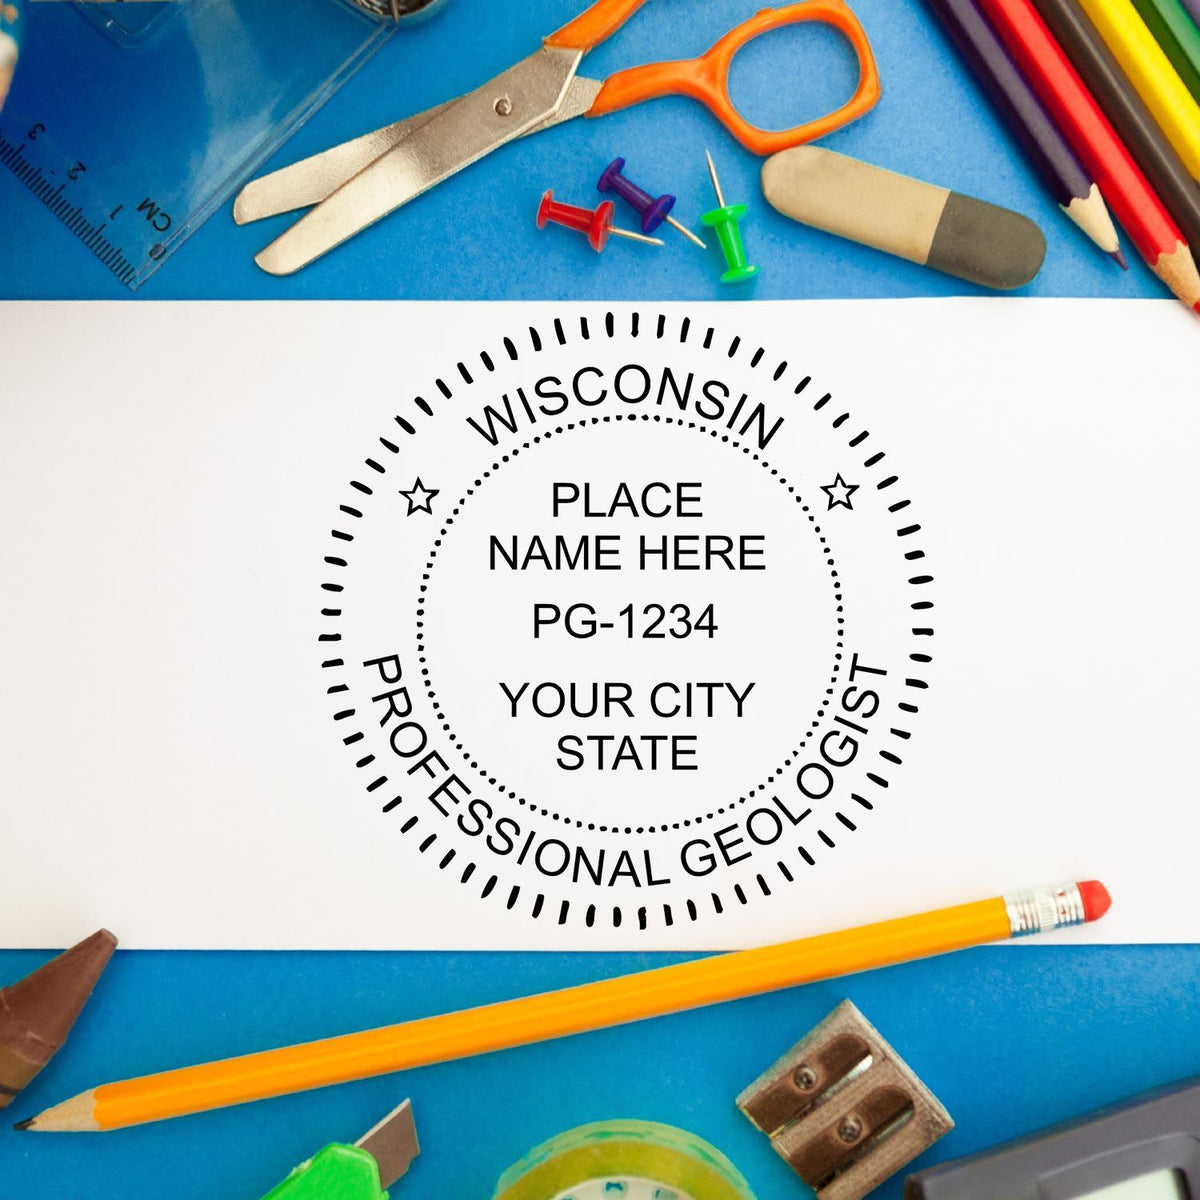 The Wisconsin Professional Geologist Seal Stamp stamp impression comes to life with a crisp, detailed image stamped on paper - showcasing true professional quality.